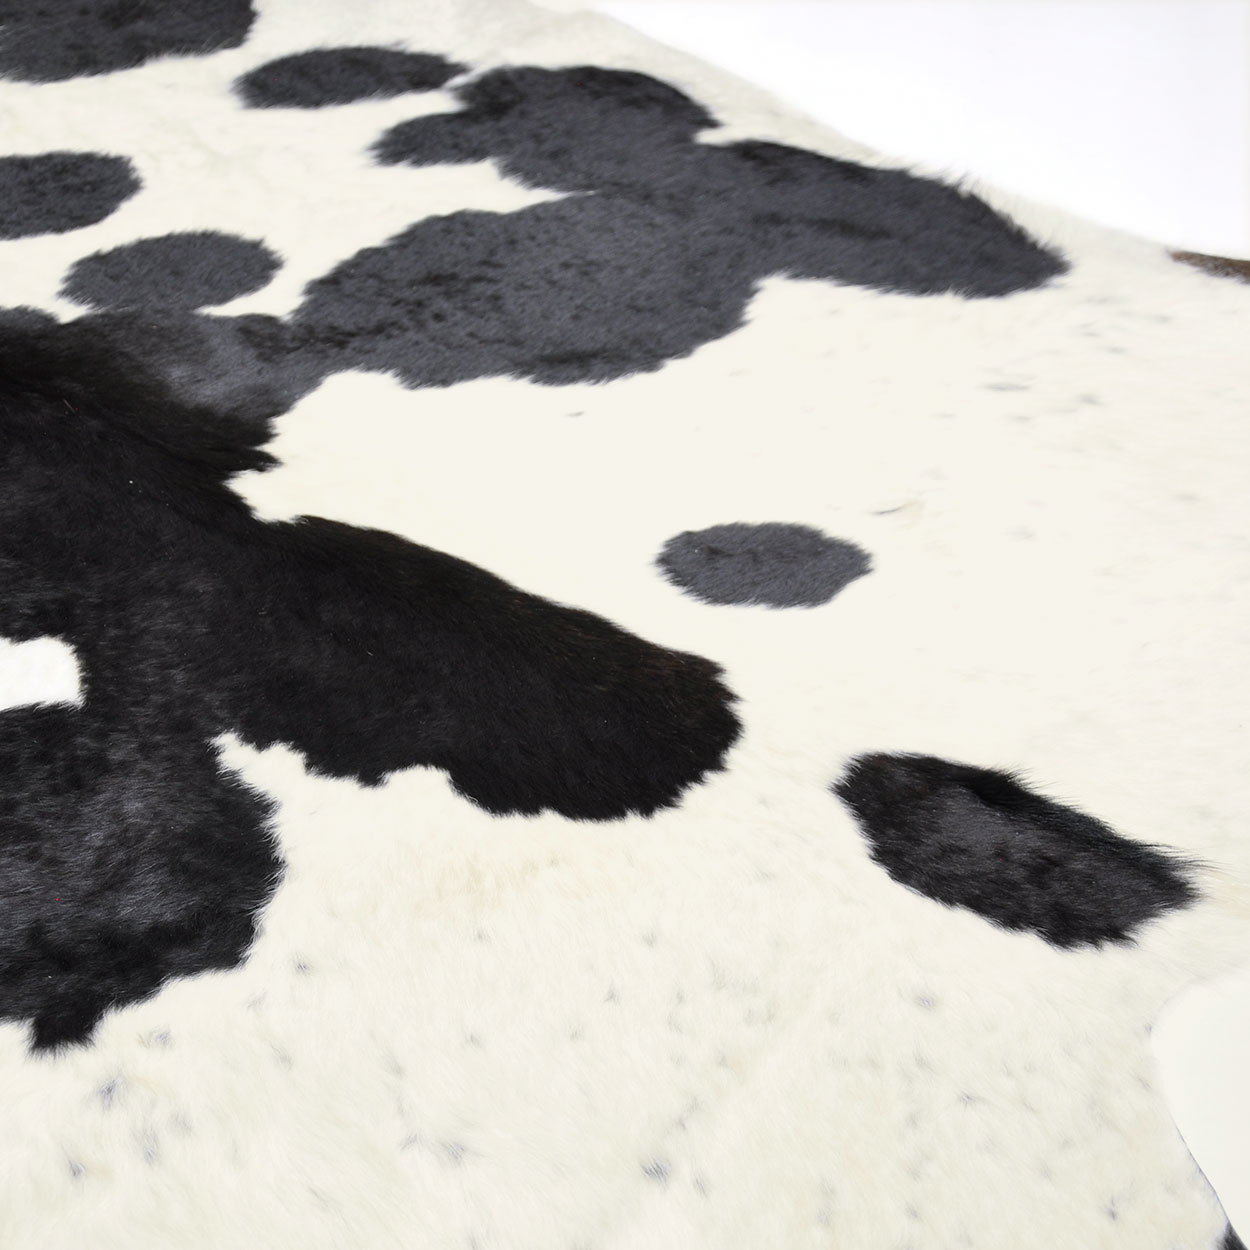 14305 - One-of-a-Kind Black and Light Cream Cowhide - 82in x 75in